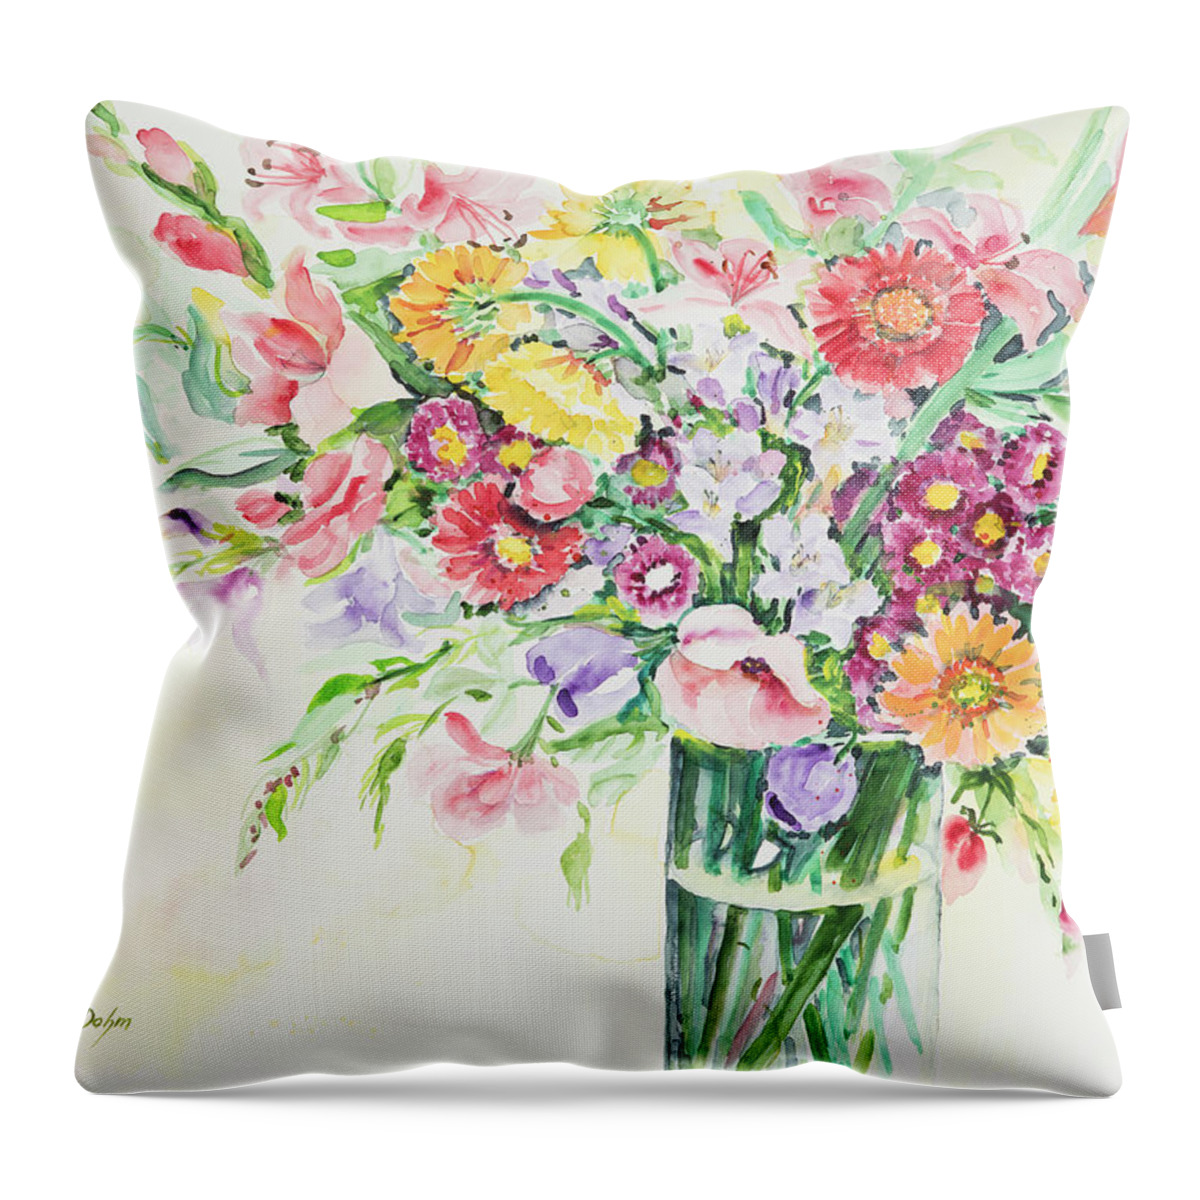 Flowers Throw Pillow featuring the painting Watercolor Series 162 by Ingrid Dohm